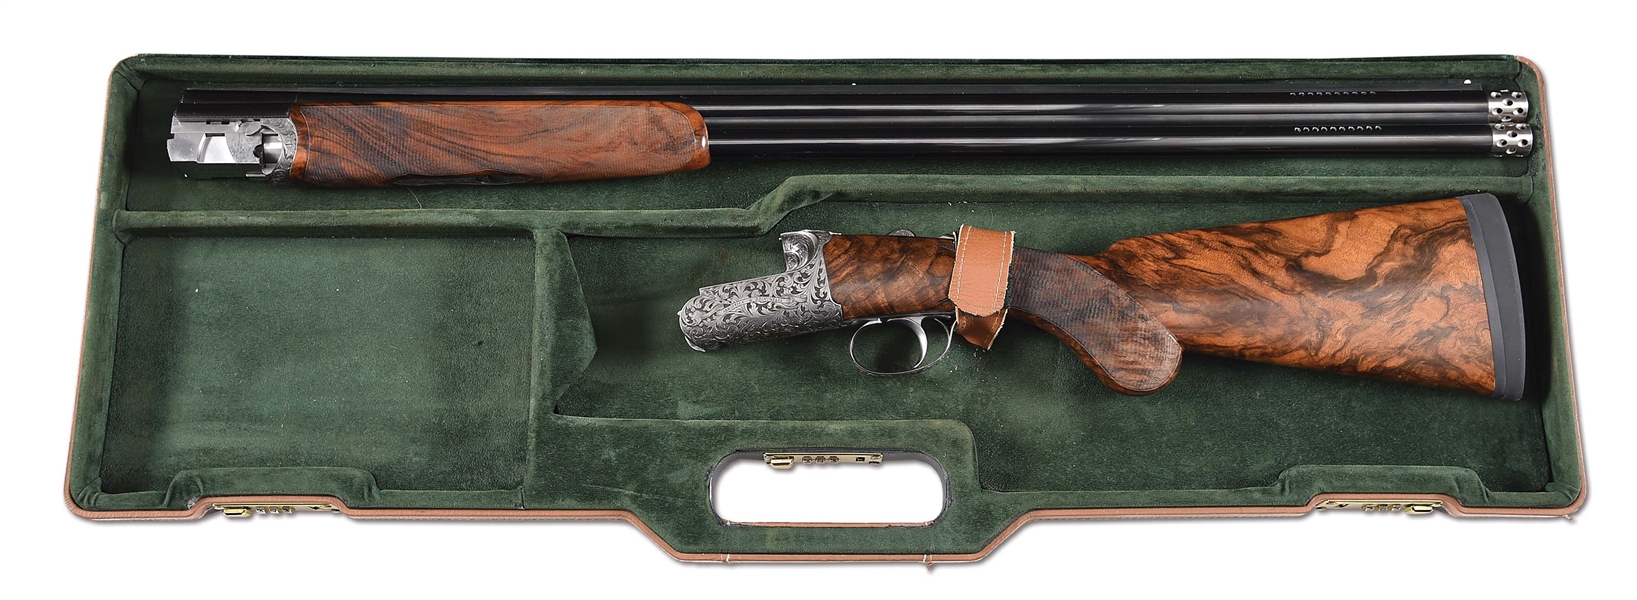 (M) ABBIATICO AND SALVINELLI EXCALIBUR 20 BORE OVER-UNDER SHOTGUN ENGRAVED BY BONSAI, WITH CASE.